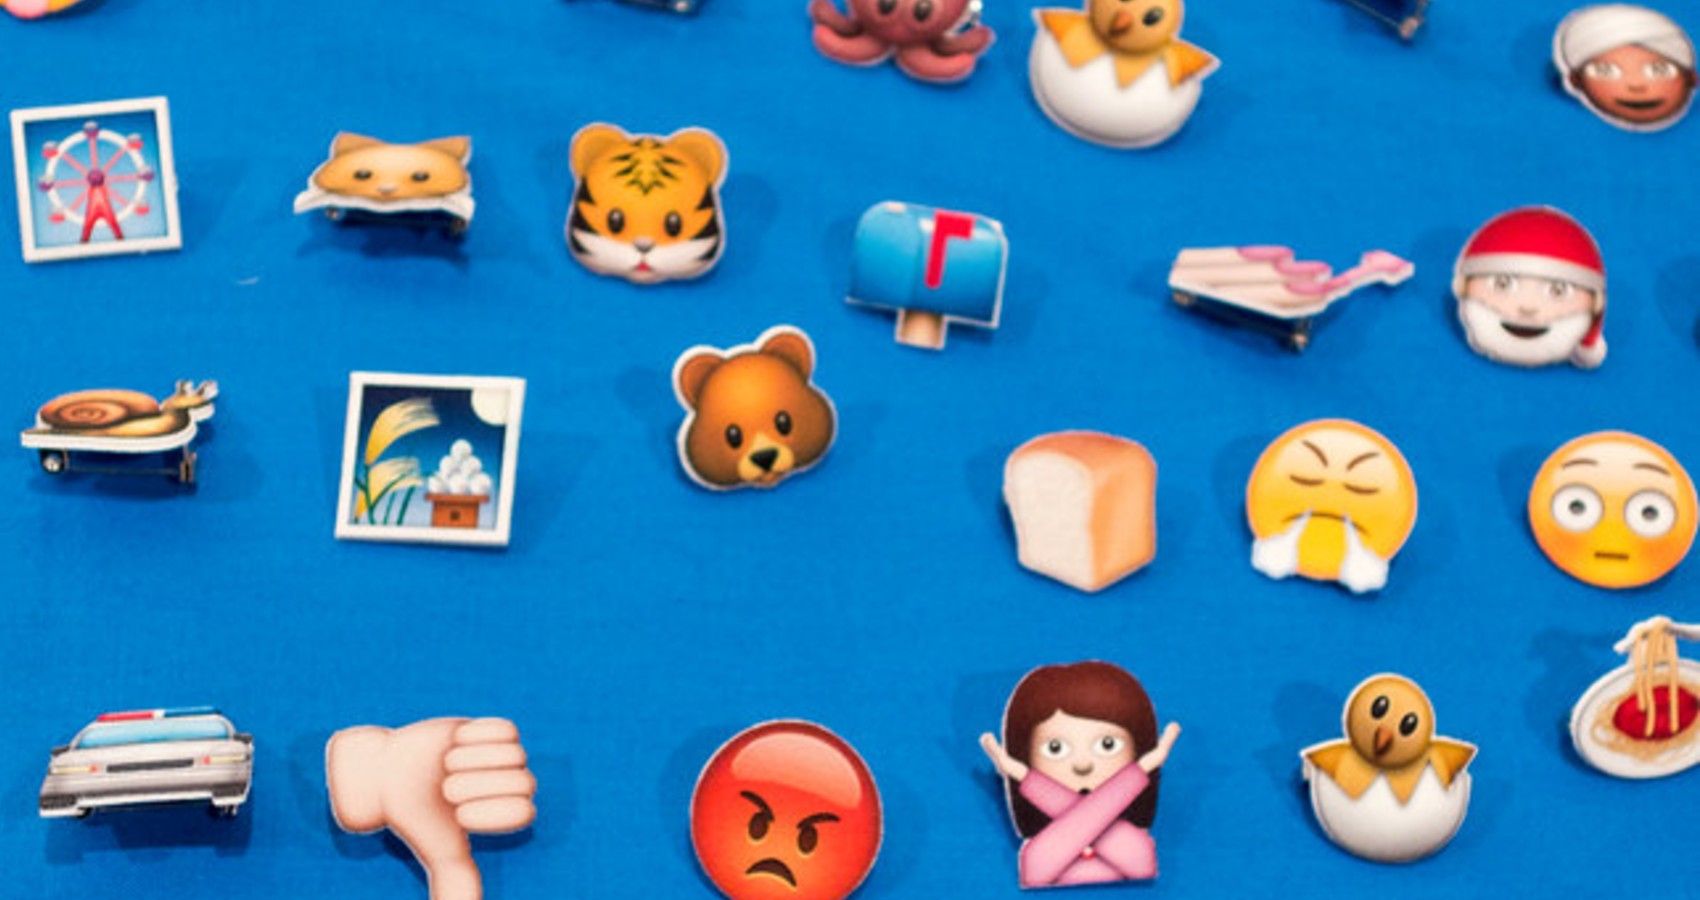 A collection of emojis on a blue background